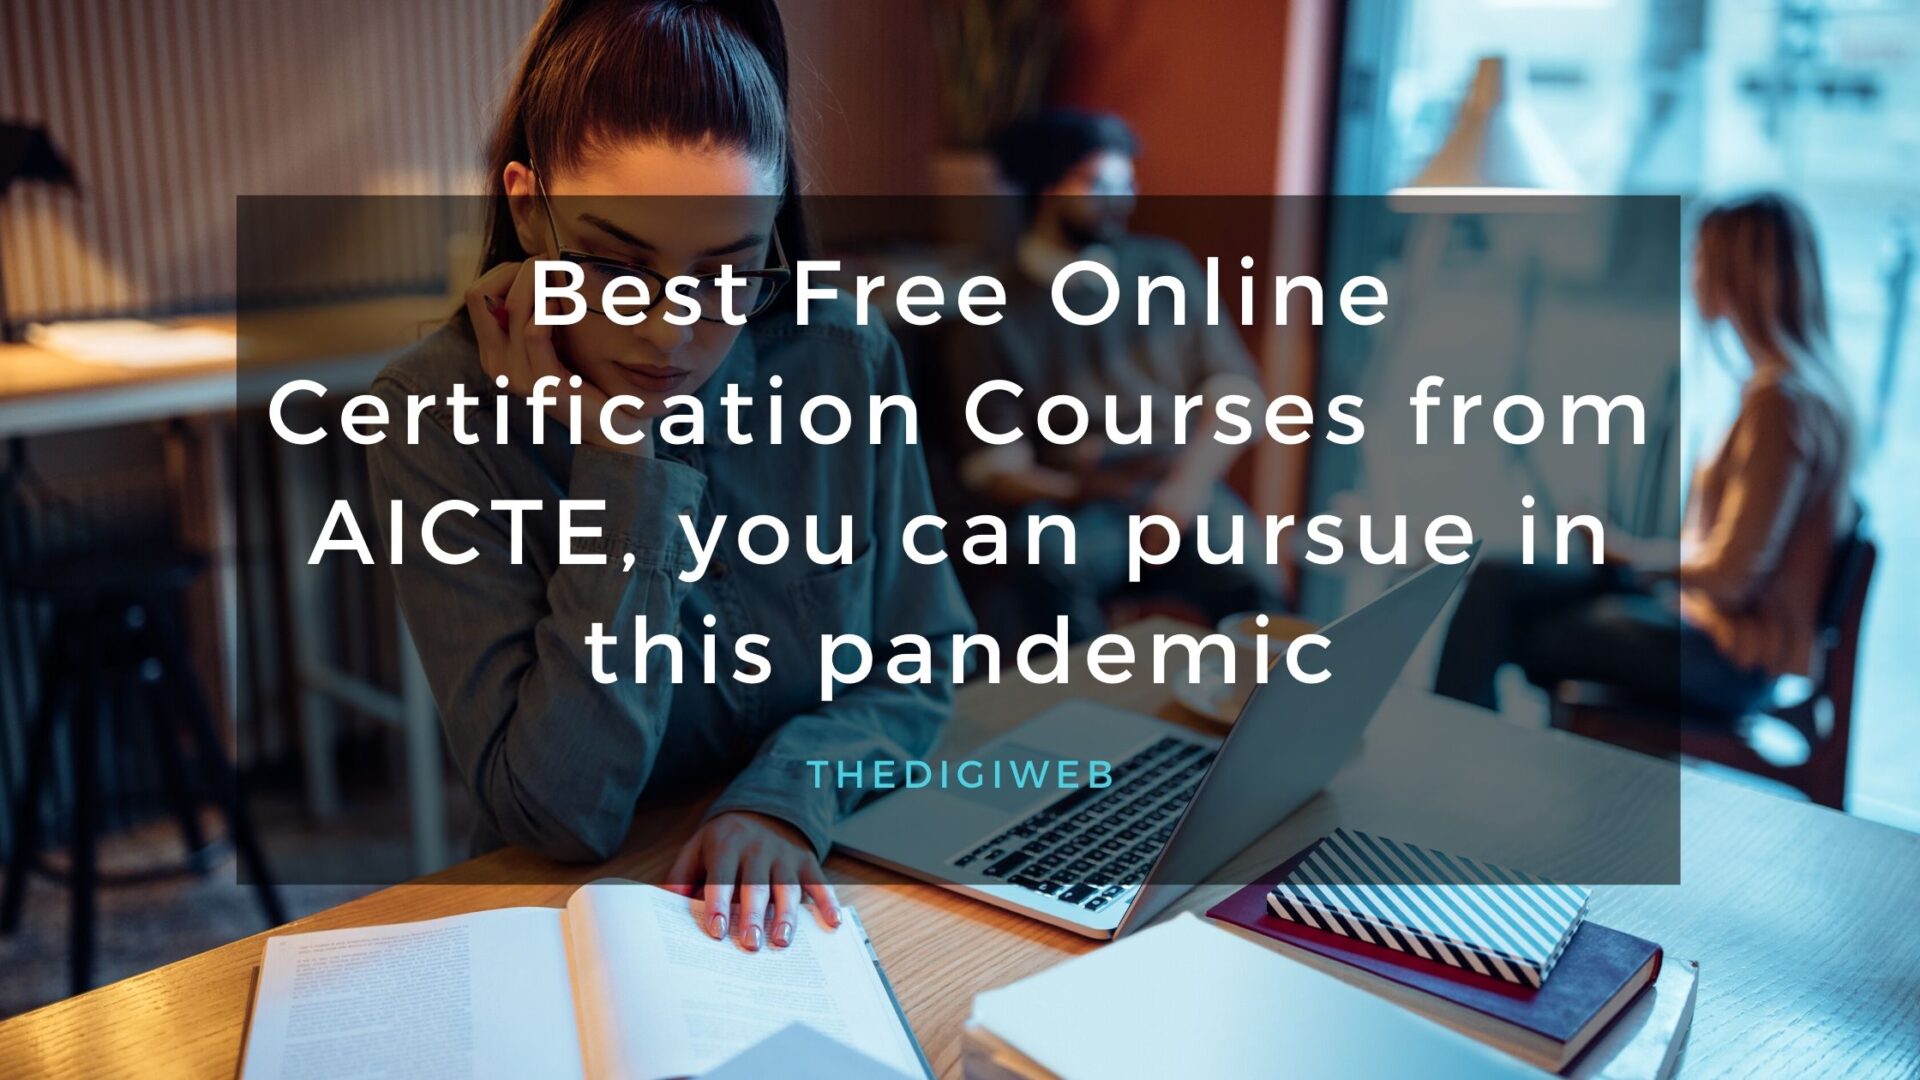 Best Free Online Certification Courses from AICTE you can pursue in this pandemic-thedigiweb.jpg